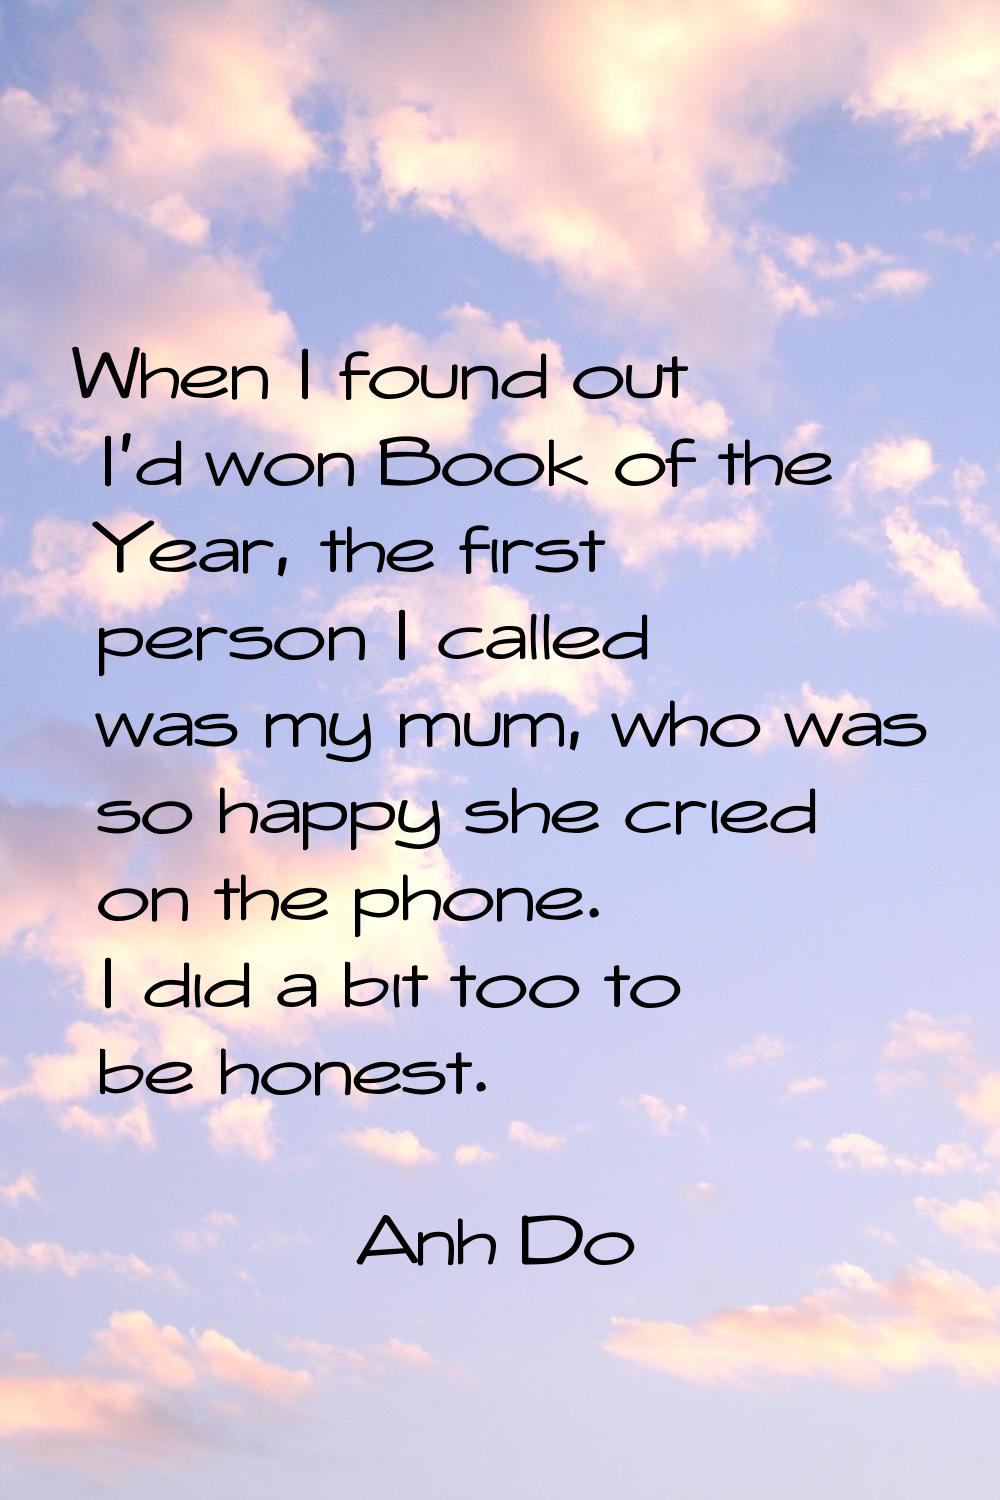 When I found out I'd won Book of the Year, the first person I called was my mum, who was so happy s